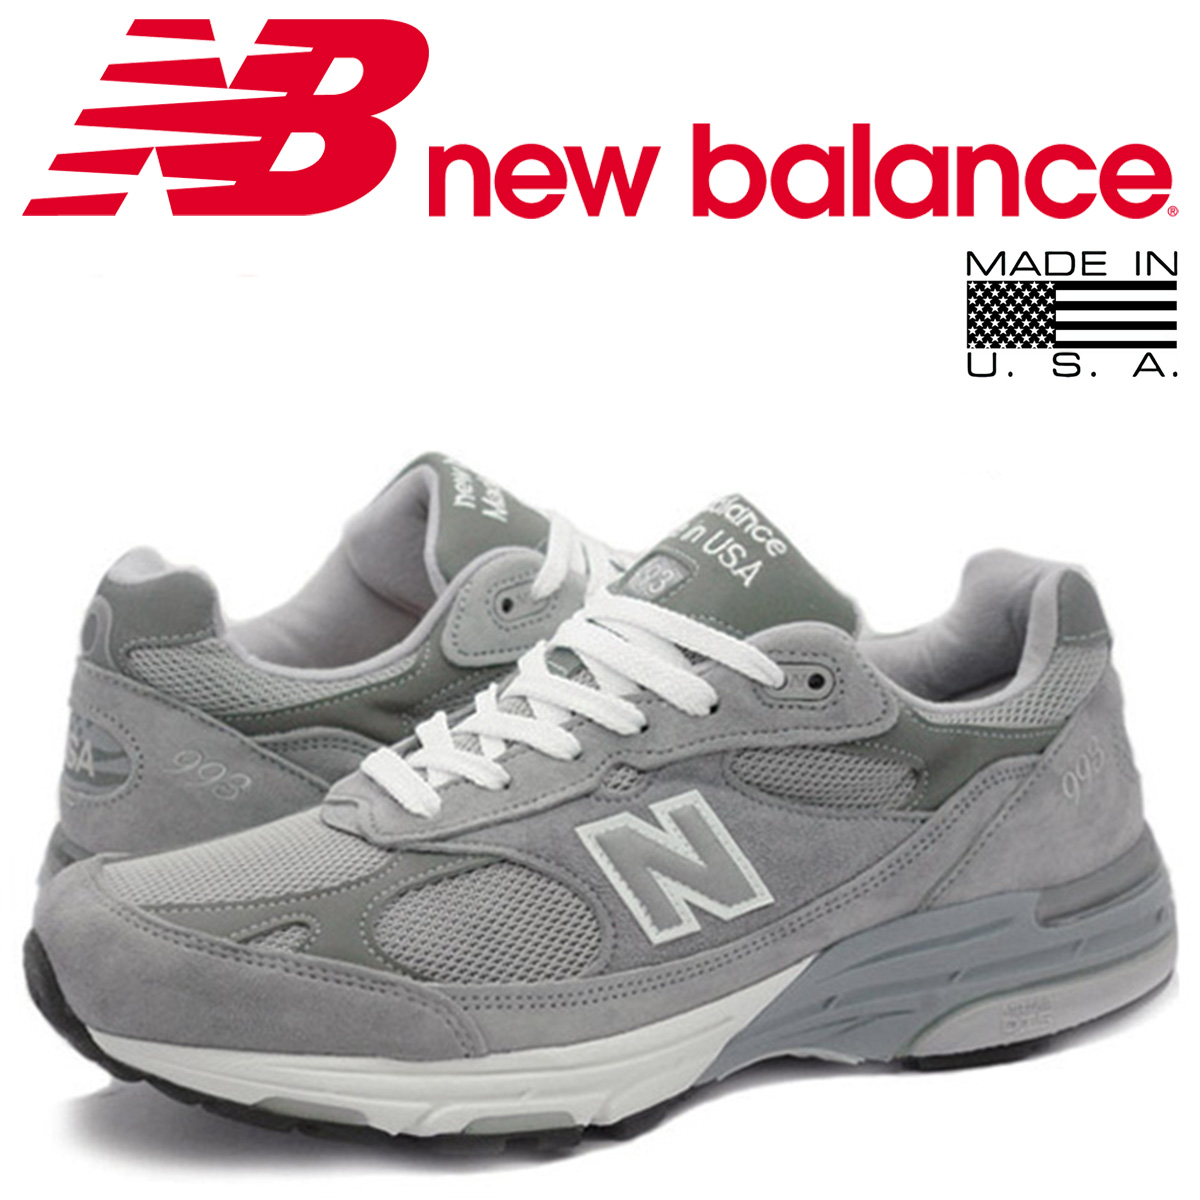 jim's new balance outlet off 55% - www 